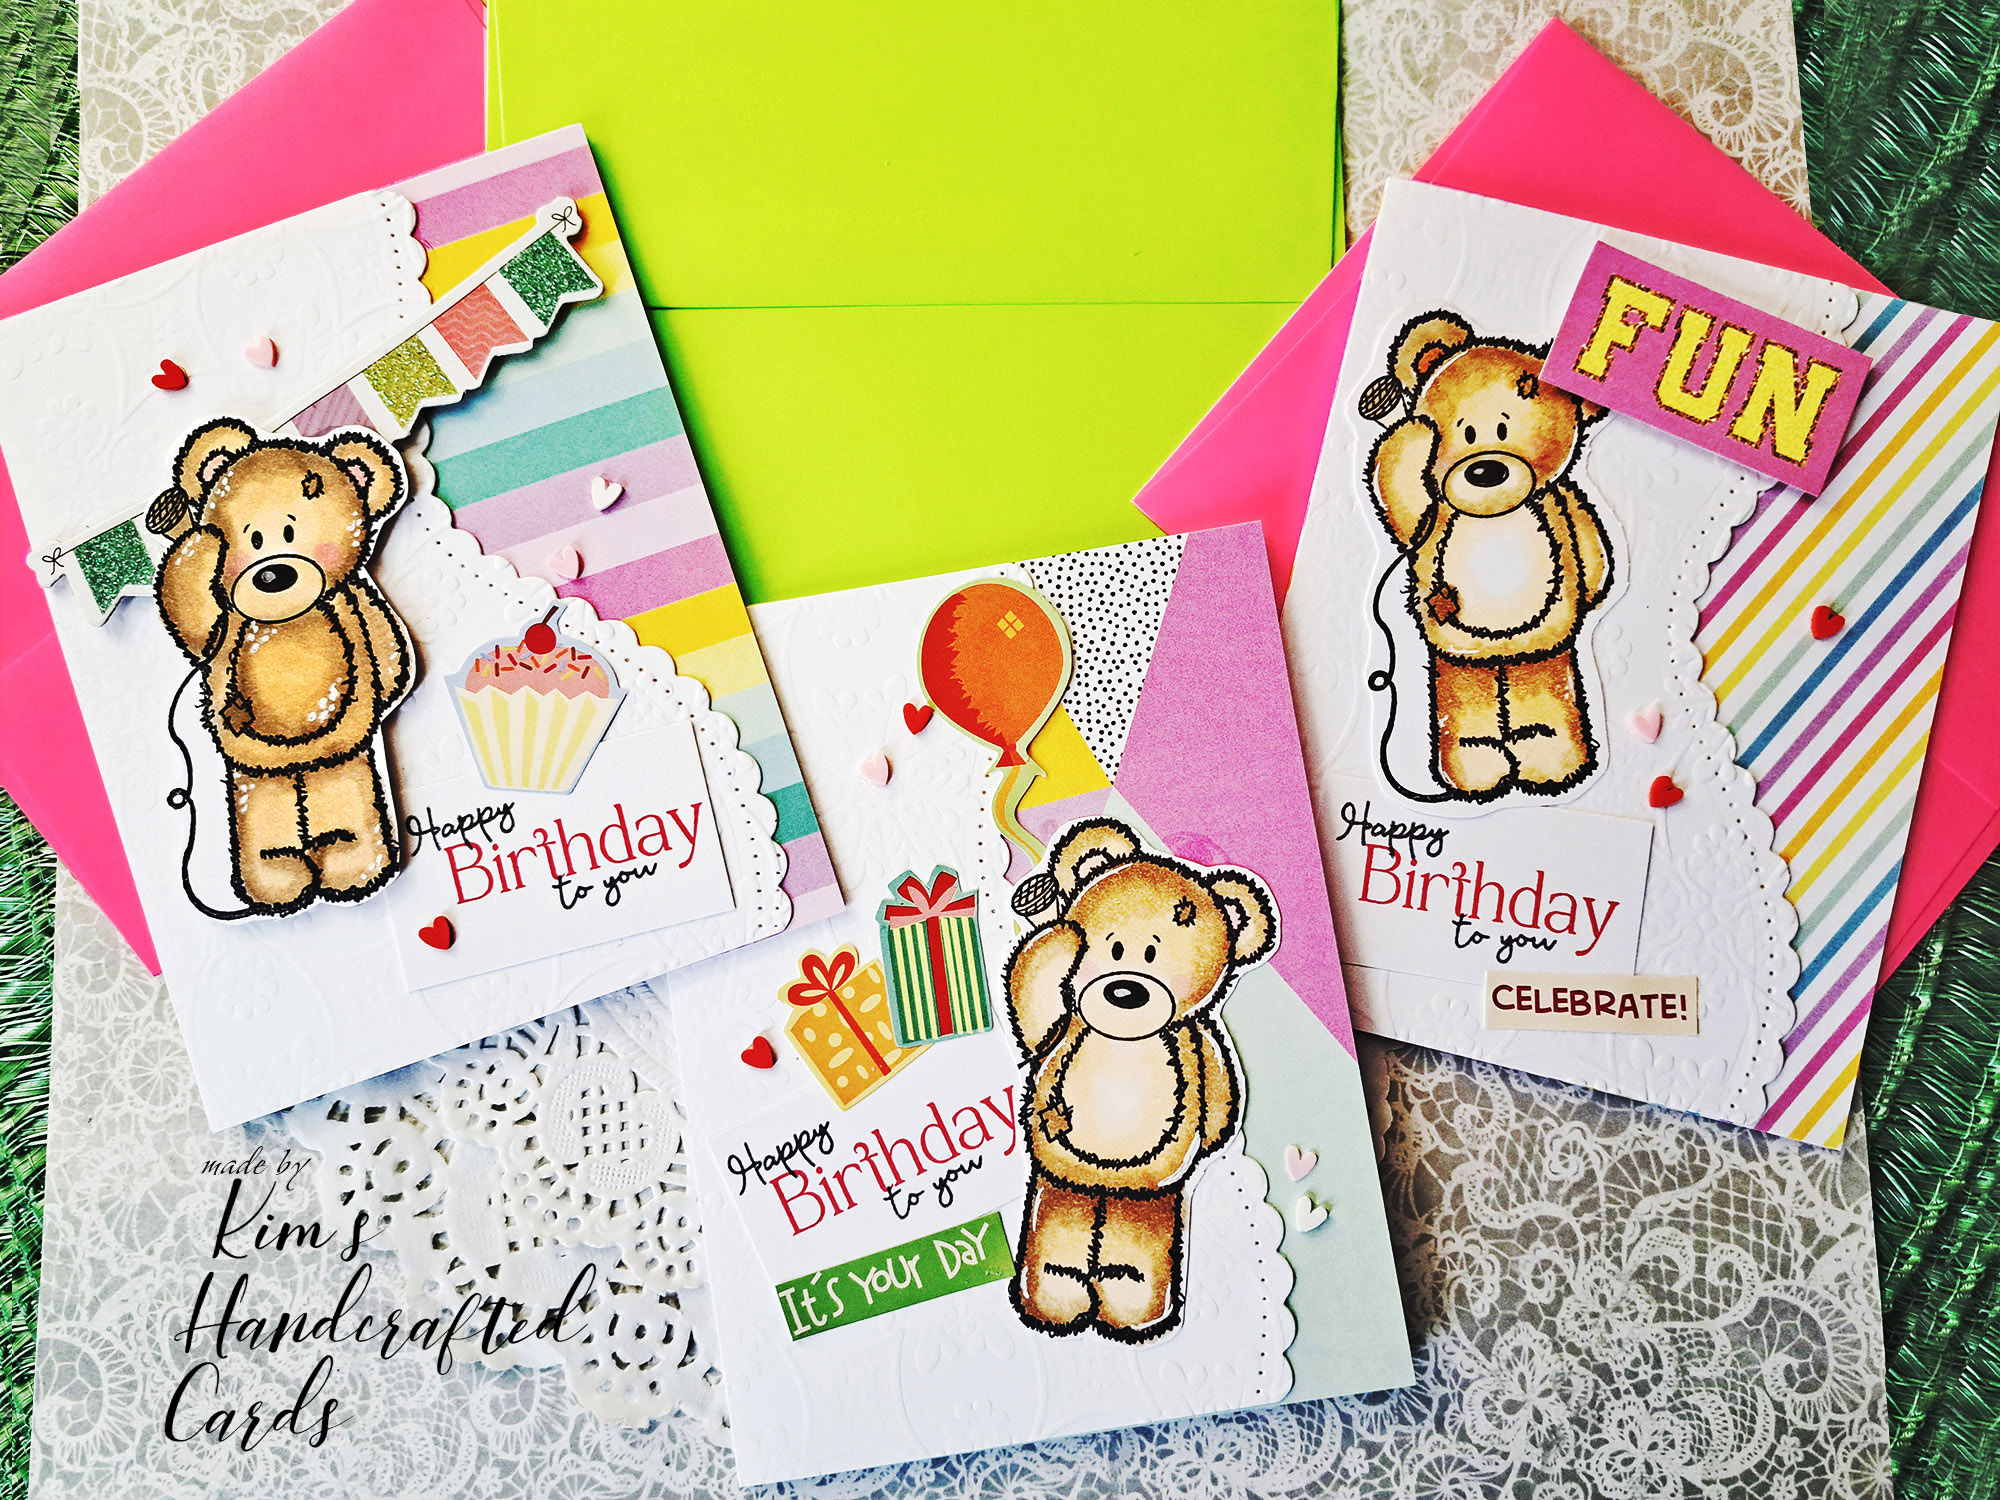 Sweet Birthday Cards using the "Precious Bears" Mini Stamp Set from The Diary of Belle Rose